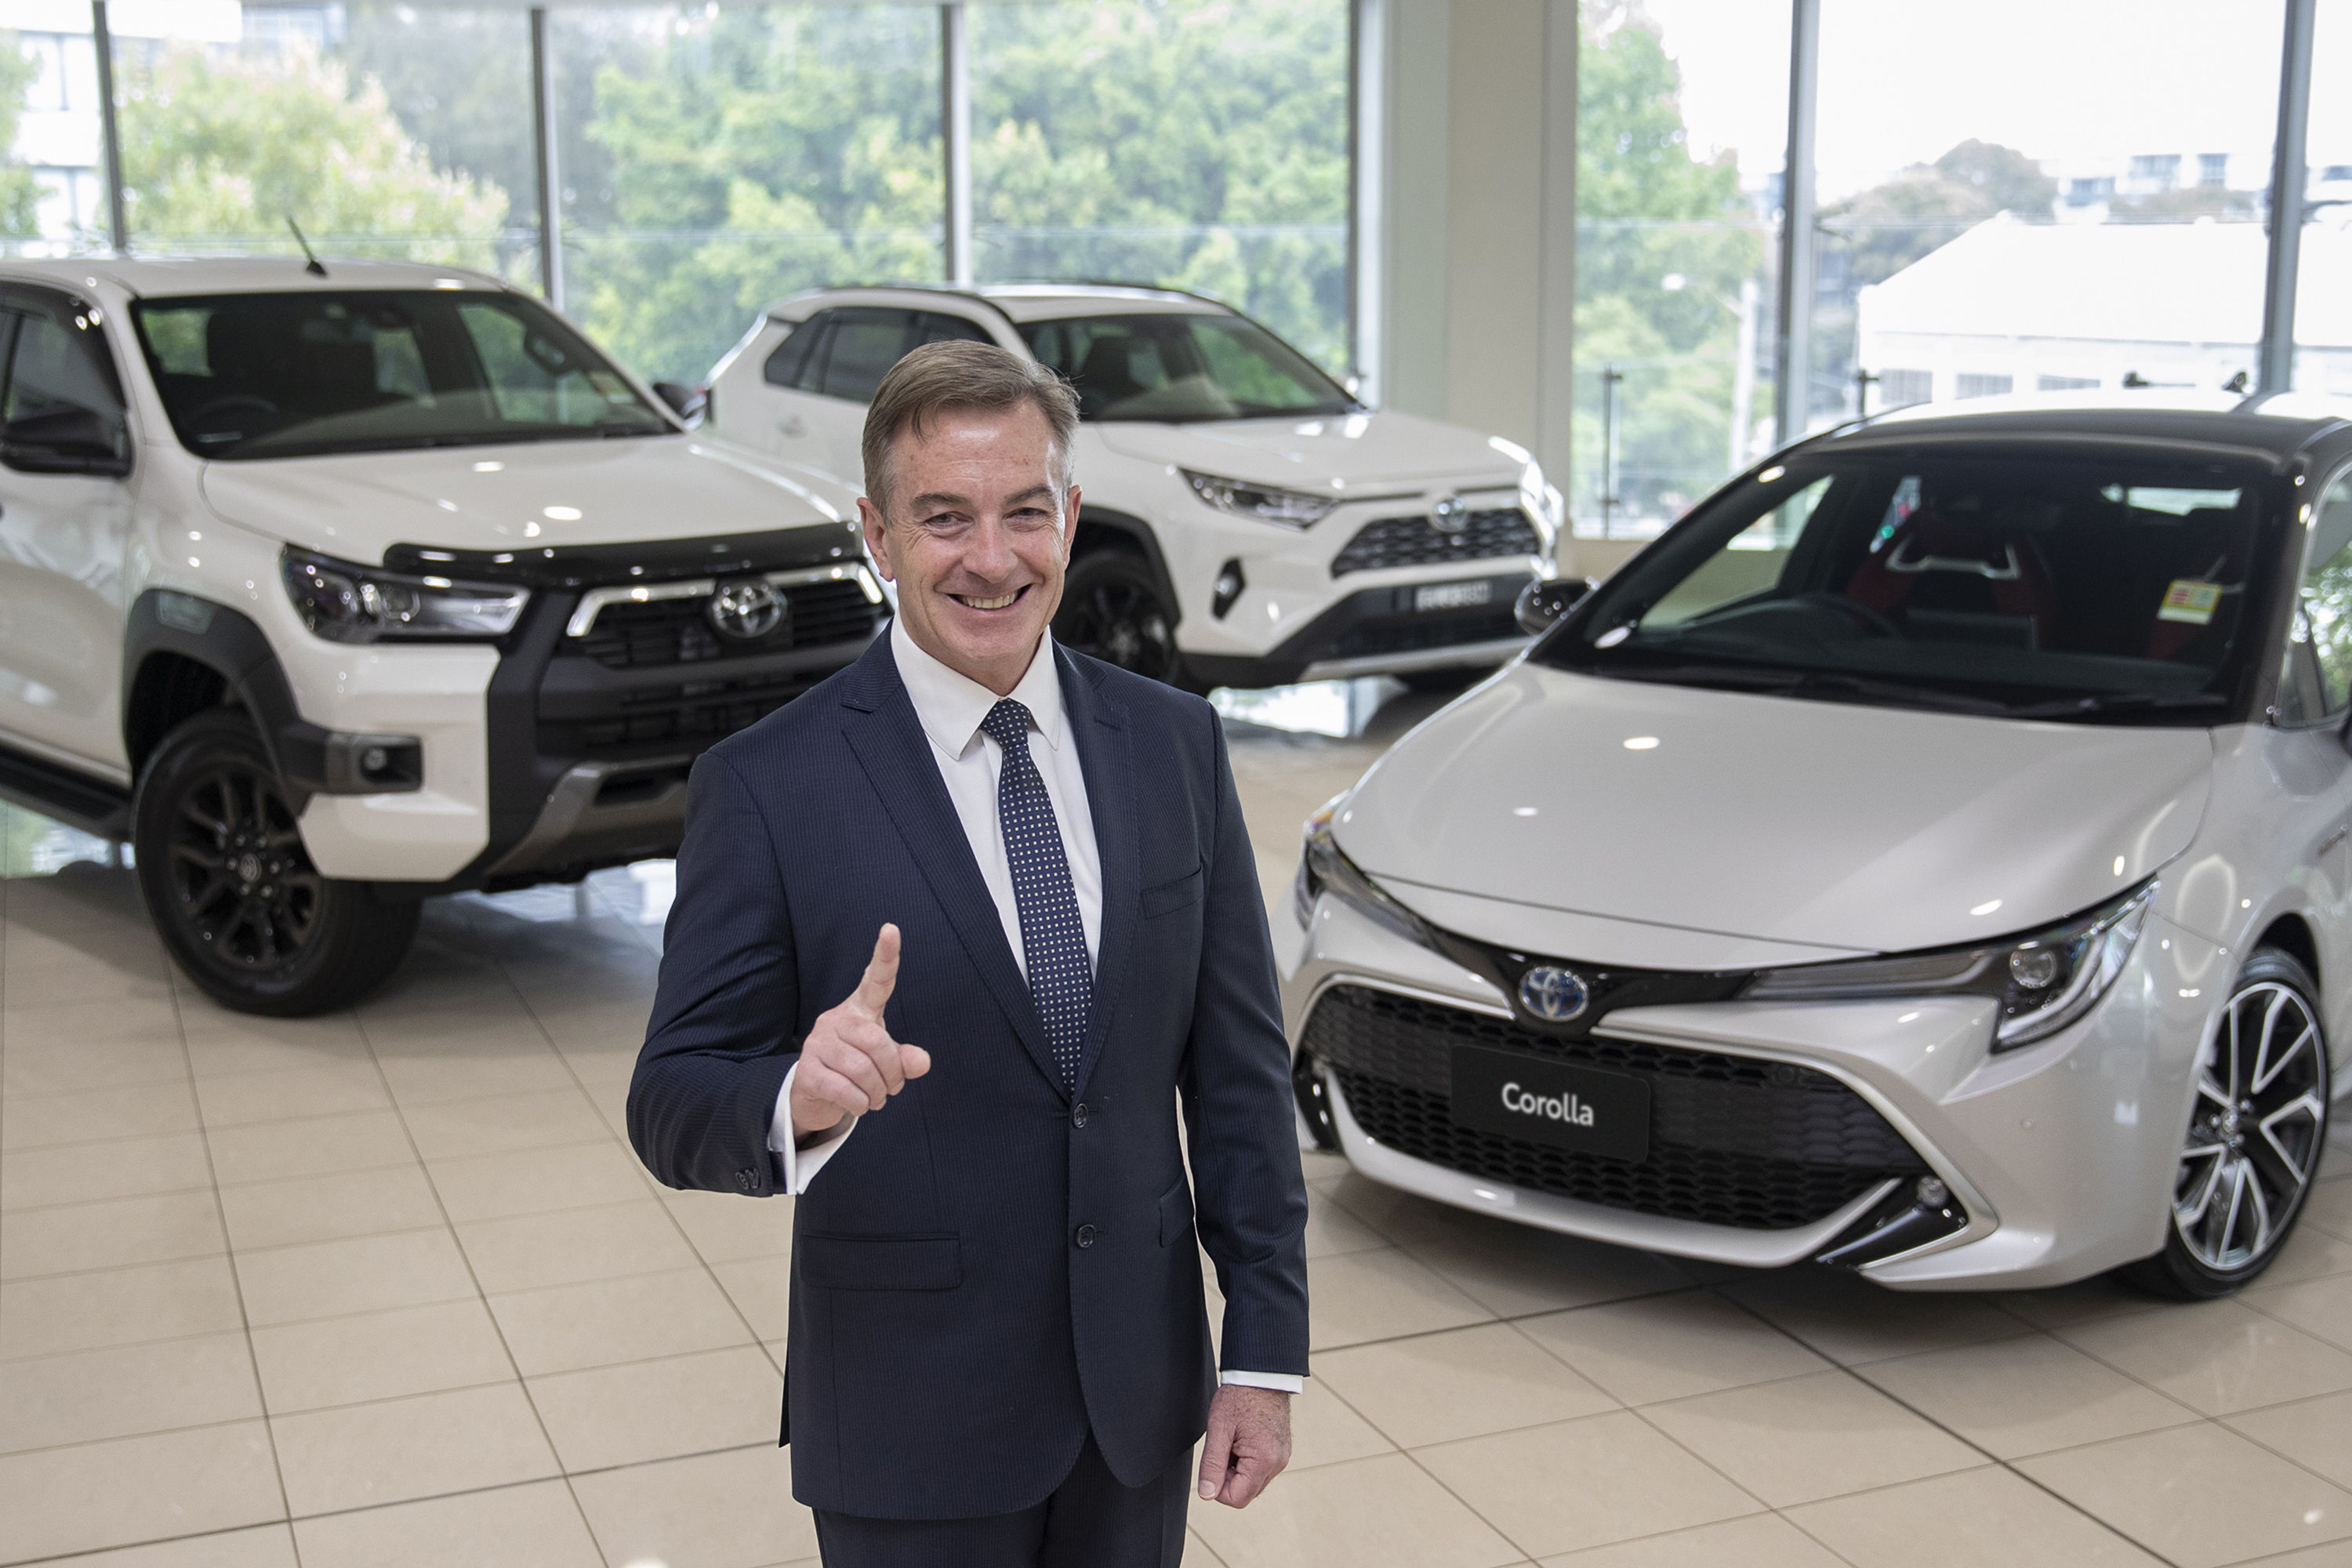 Toyota Australia President & CEO Matthew Callachor with Australia’s top selling vehicle for 2020 Toyota HiLux, top selling passenger vehicle Toyota Corolla and top selling SUV Toyota RAV4.